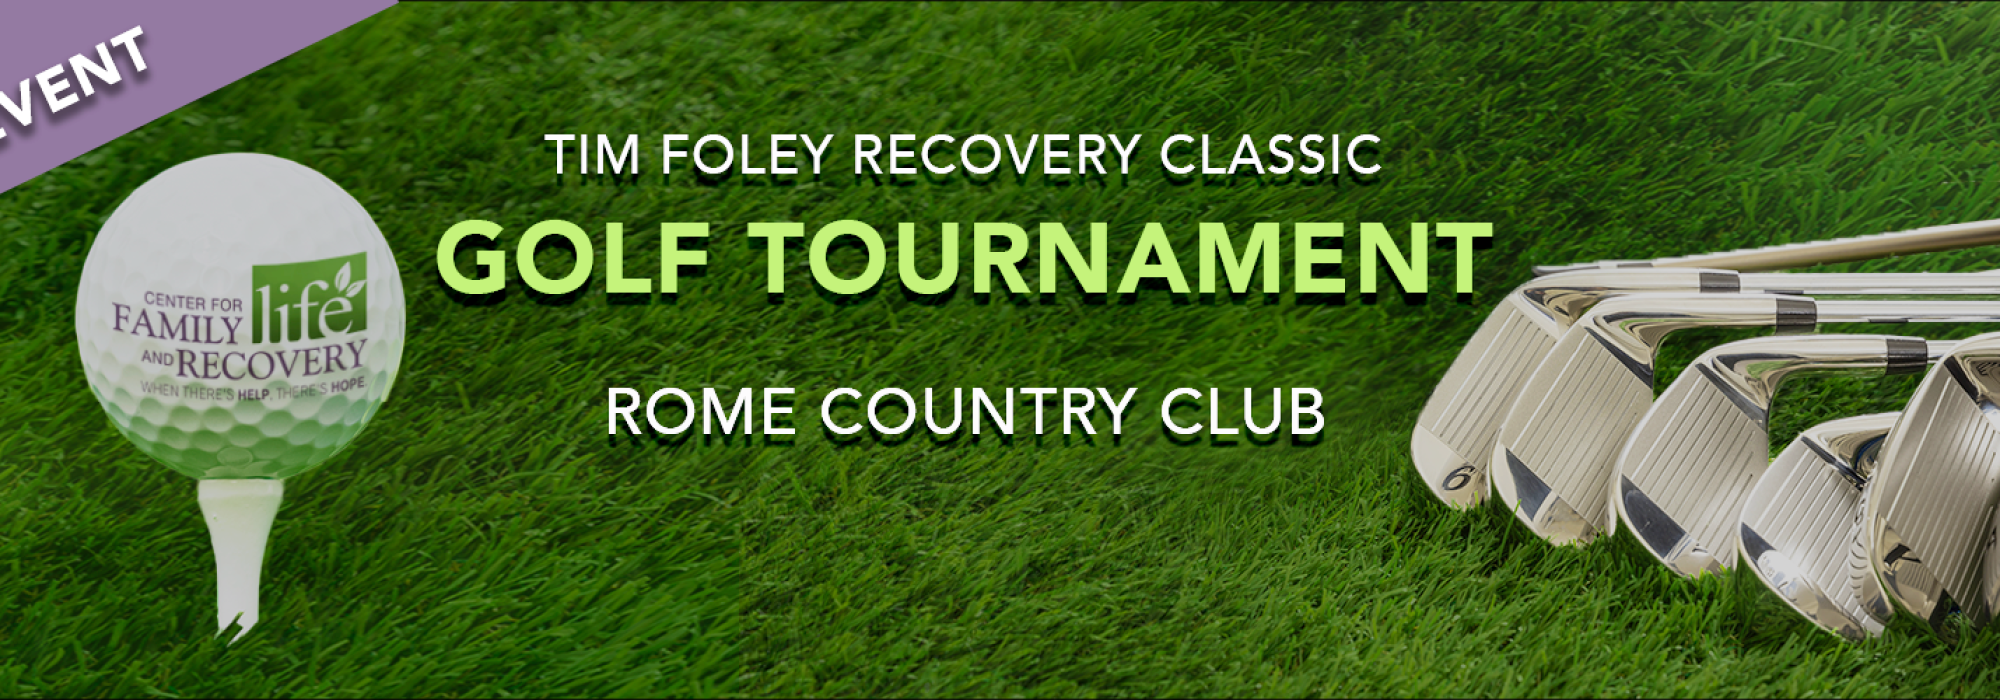 CFLR Golf Home Page Banner_evergreen (1)